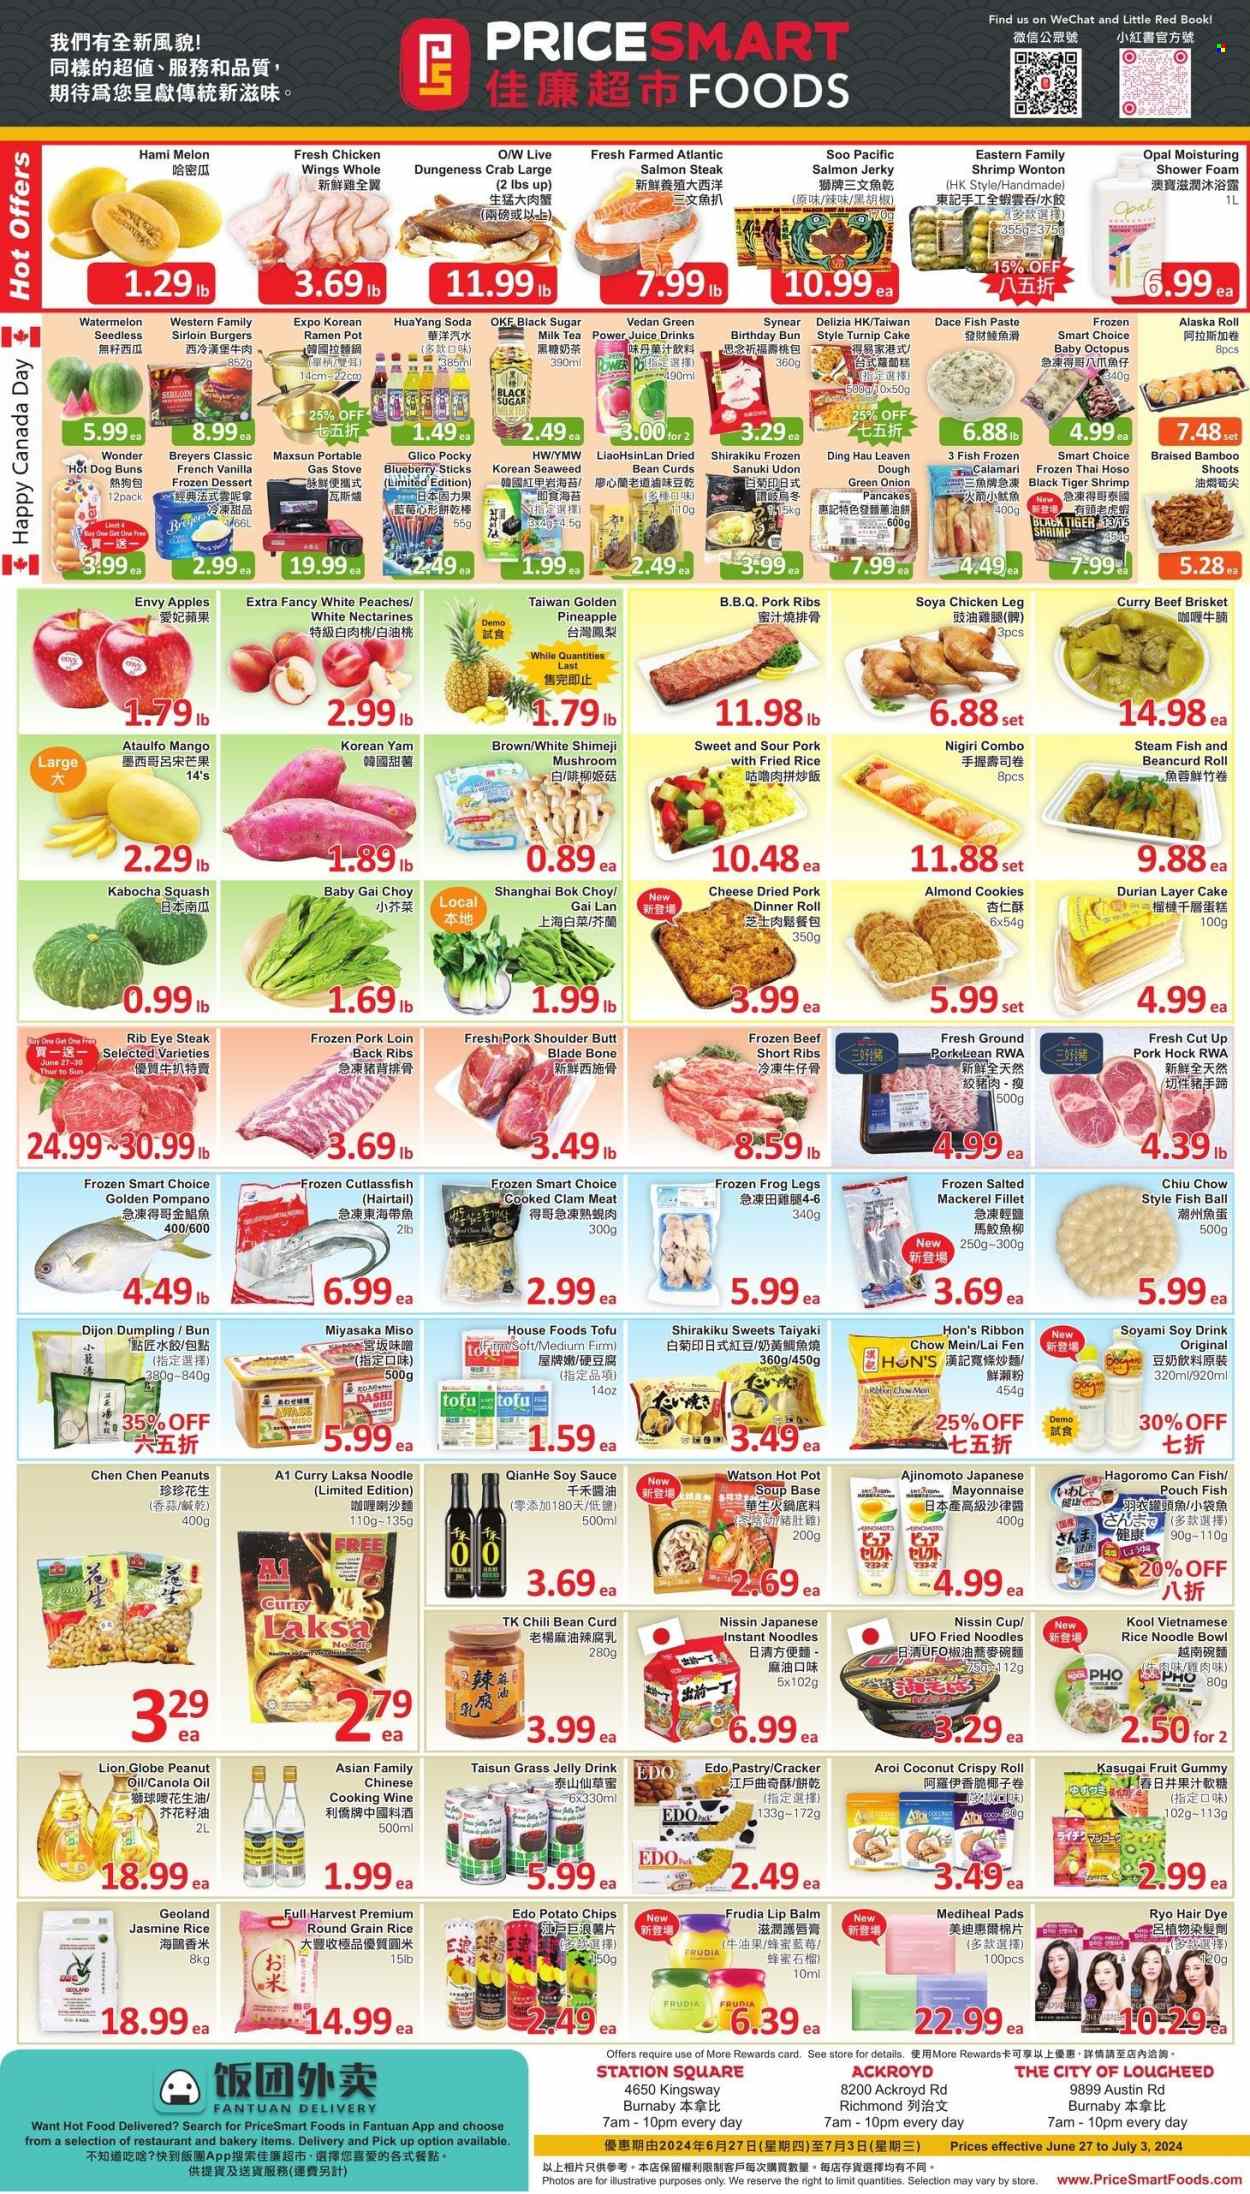 thumbnail - PriceSmart Foods Flyer - June 27, 2024 - July 03, 2024 - Sales products - hot dog rolls, cake, dinner rolls, buns, beans, bok choy, turnips, green onion, nectarines, melons, peaches, calamari, clams, mackerel, octopus, pompano, seafood, crab, shrimps, ramen, soup, hamburger, instant noodles, pancakes, dumplings, noodles, Nissin, brisket, ready meal, jerky, curd, tofu, jelly, soy milk, milk tea, mayonnaise, wonton, ice cream, frozen dessert, chicken wings, cookies, crackers, sweets, potato chips, sugar, seaweed, bamboo shoot, jasmine rice, Dashi, miso, soy sauce, canola oil, peanut oil, oil, peanuts, Cerés, antioxidant drink, soda, cooking wine, wine, alcohol, chicken legs, beef meat, beef ribs, steak, ribeye steak, beef brisket, ground pork, pork hock, pork loin, pork meat, pork ribs, pork shoulder, pads, lip balm, hair color, tong, pot, pin, book, ribbon. Page 1.